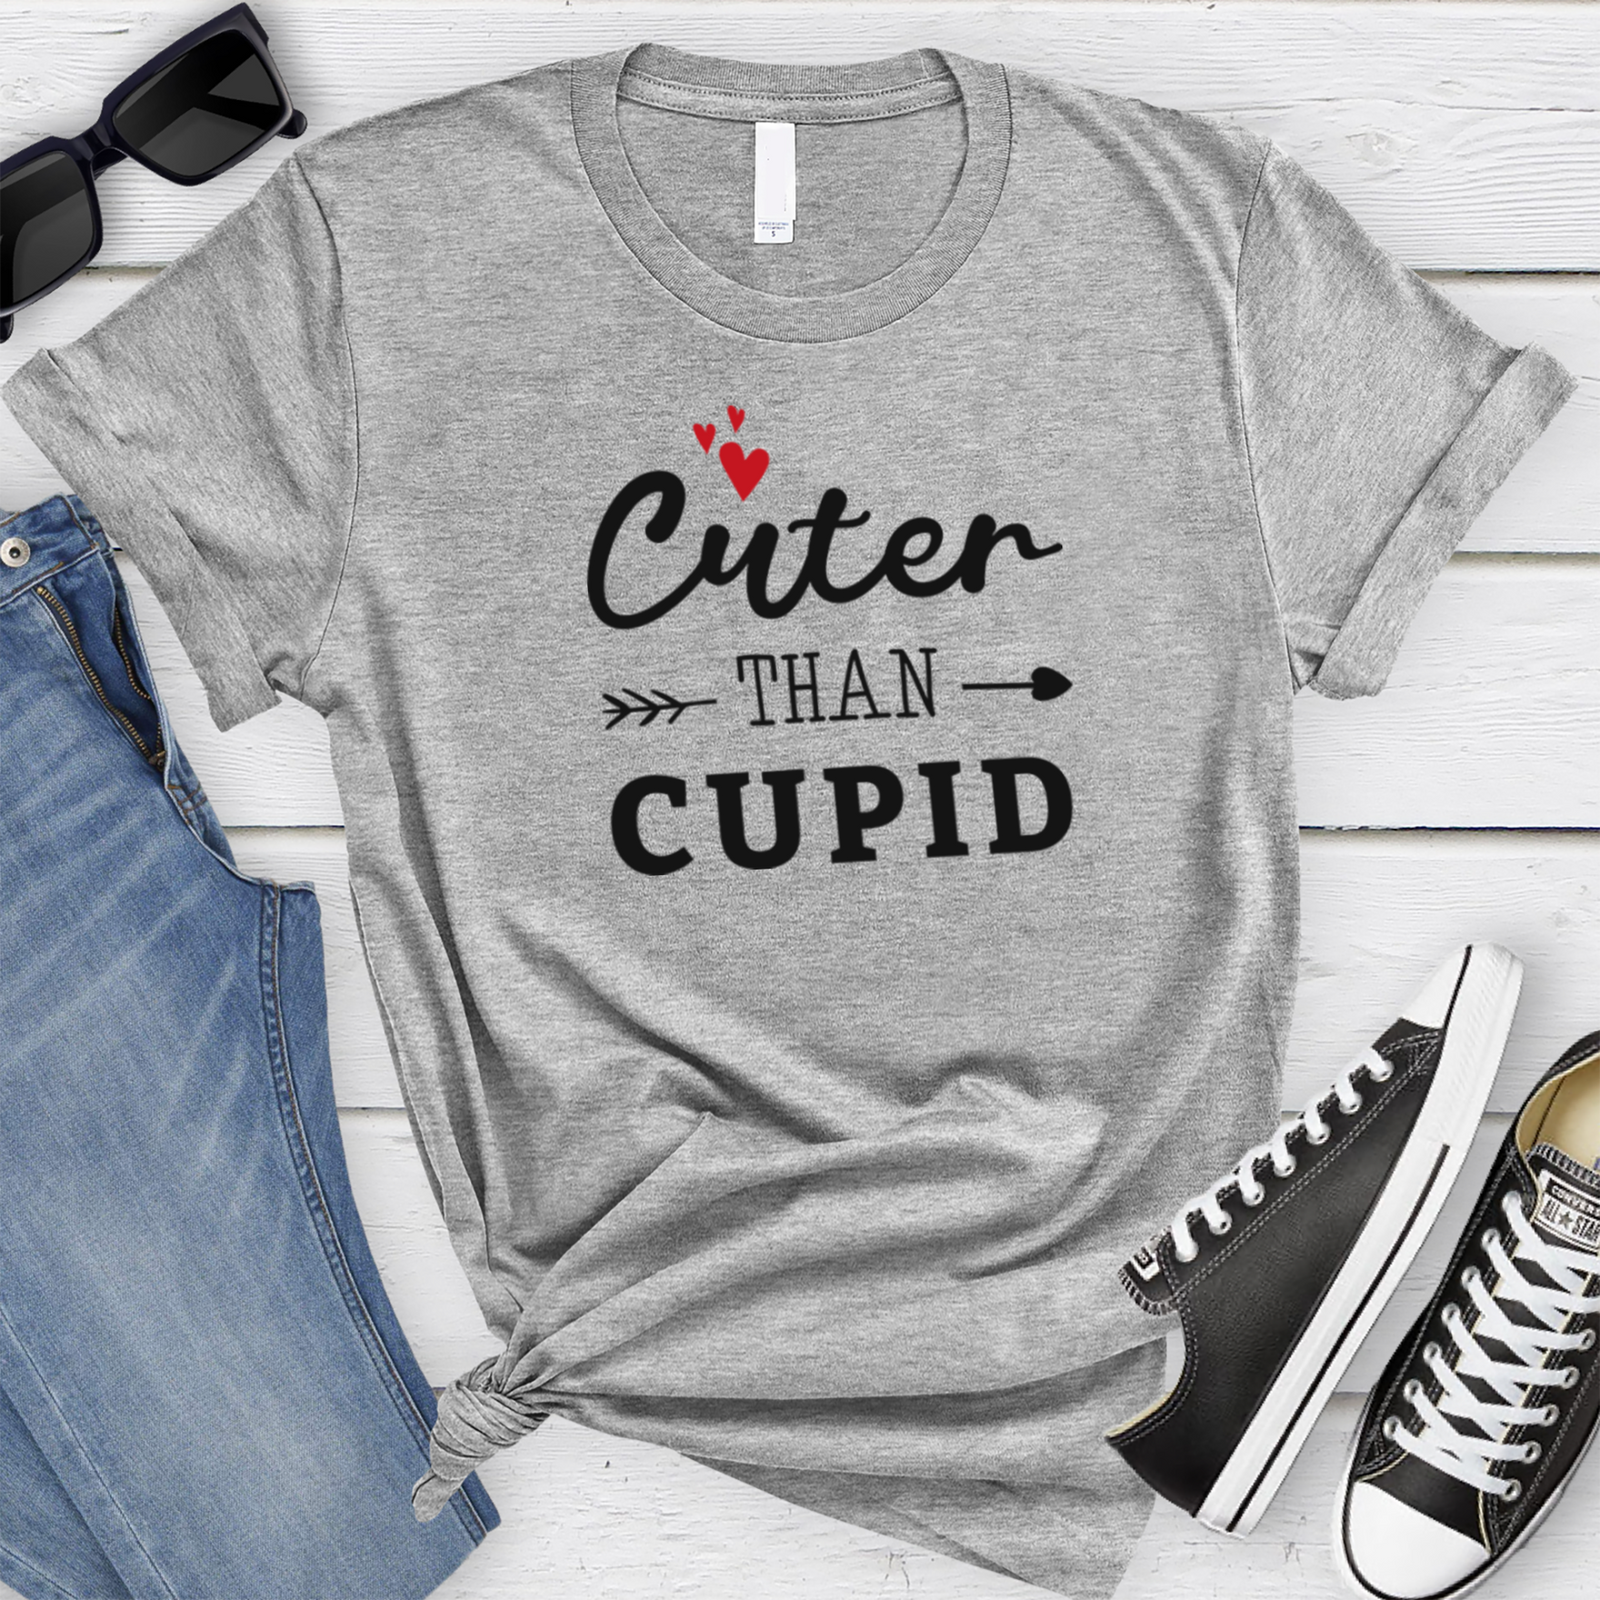 Grey Womens T-Shirt With Cuter Than Cupid Design